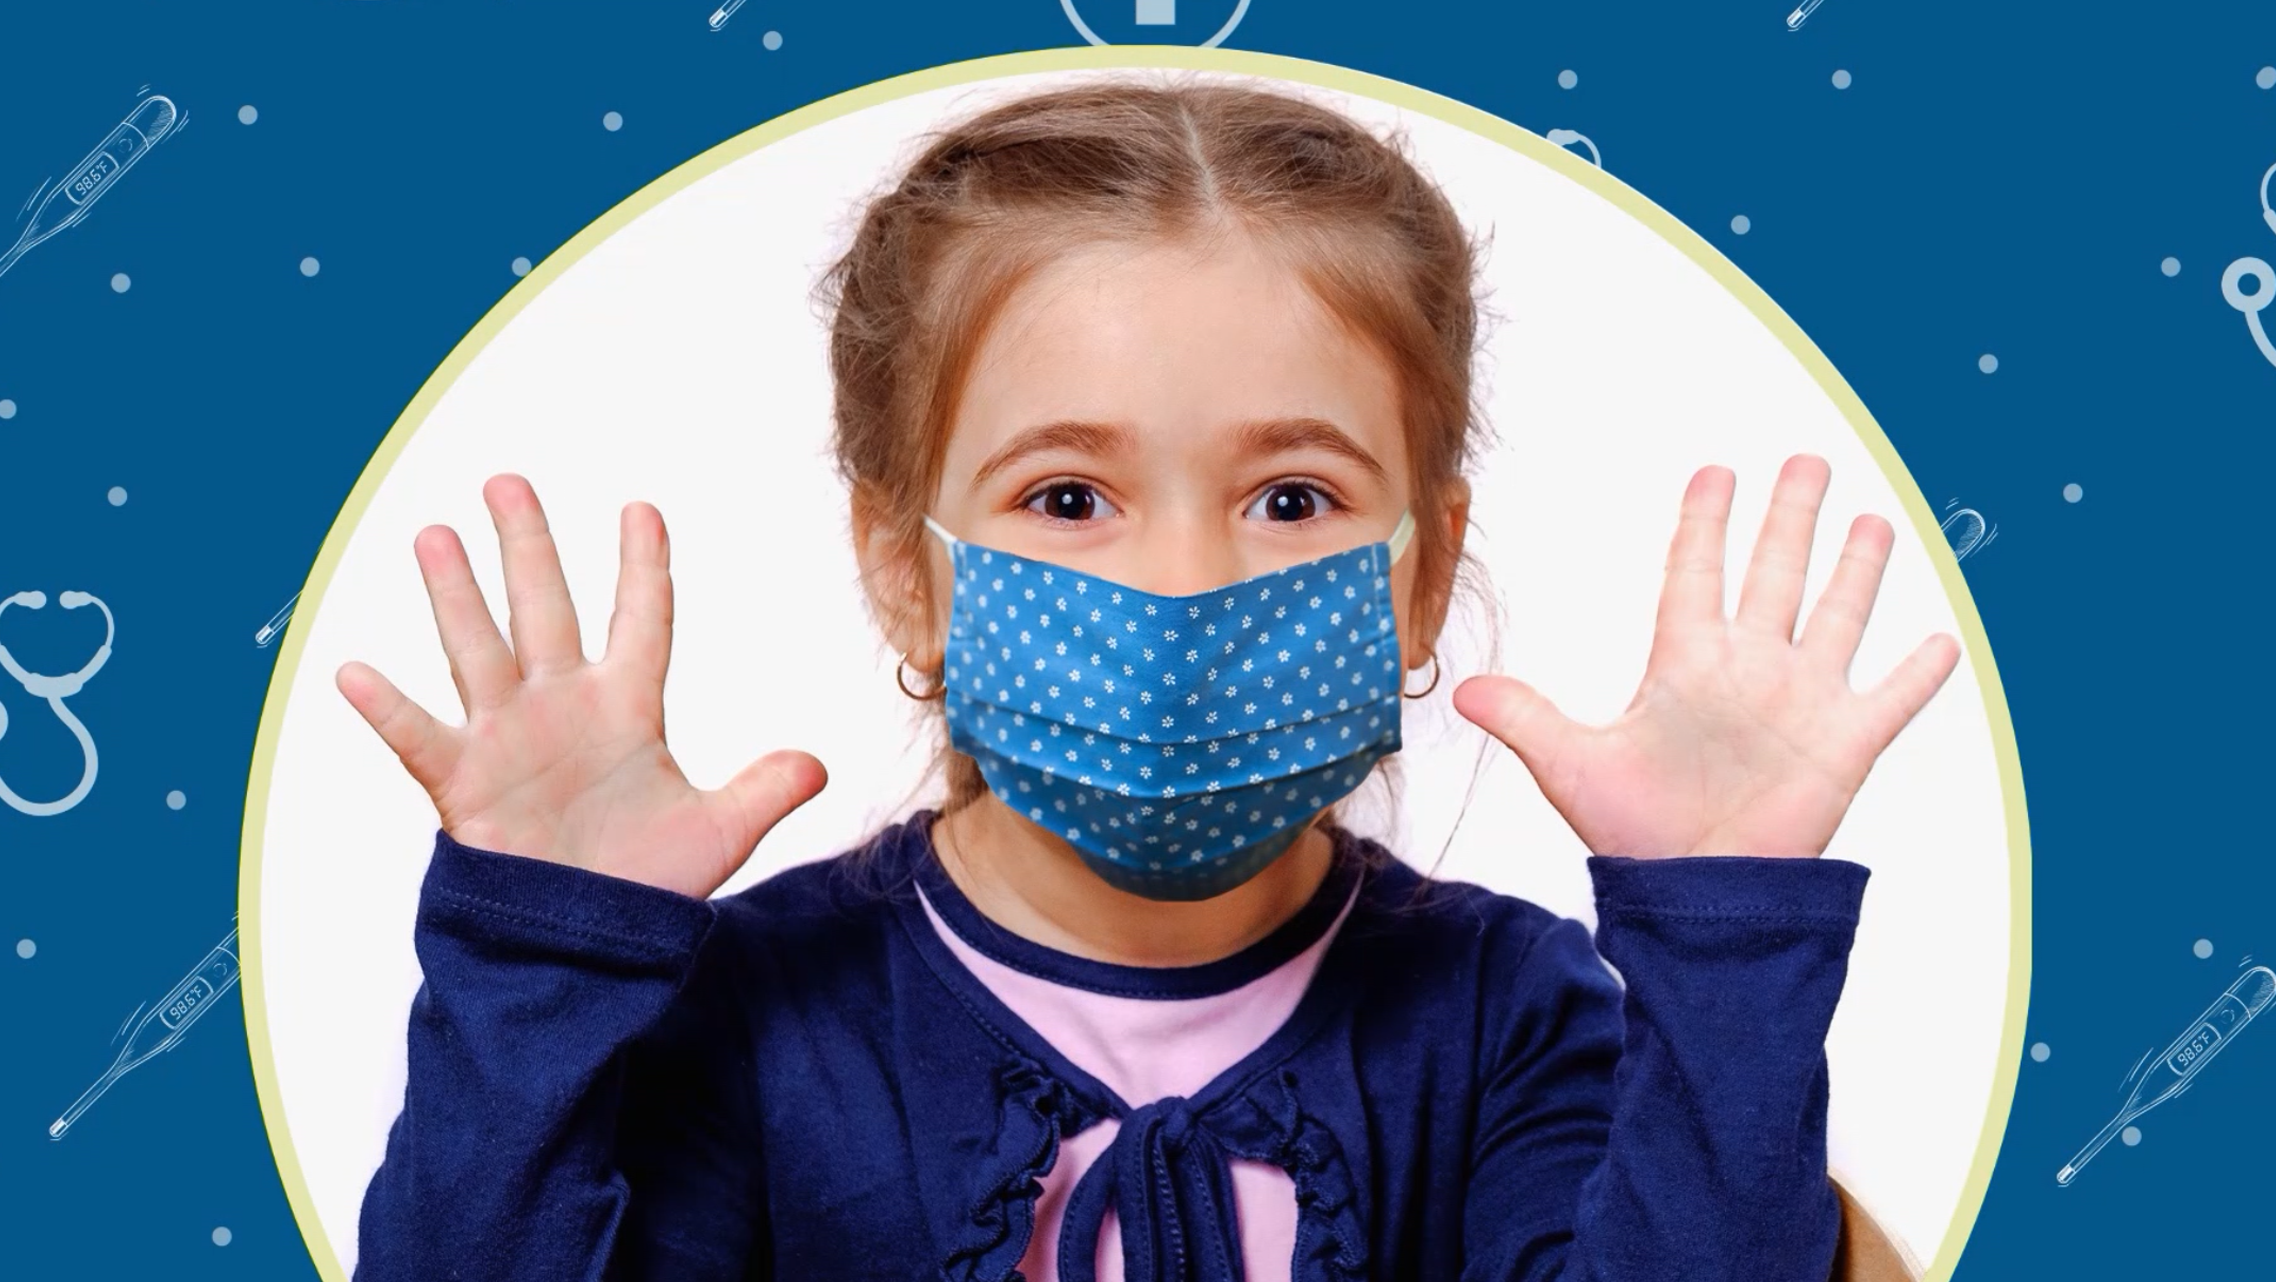 Wearing A Mask Helps Stop the Spread of Germs